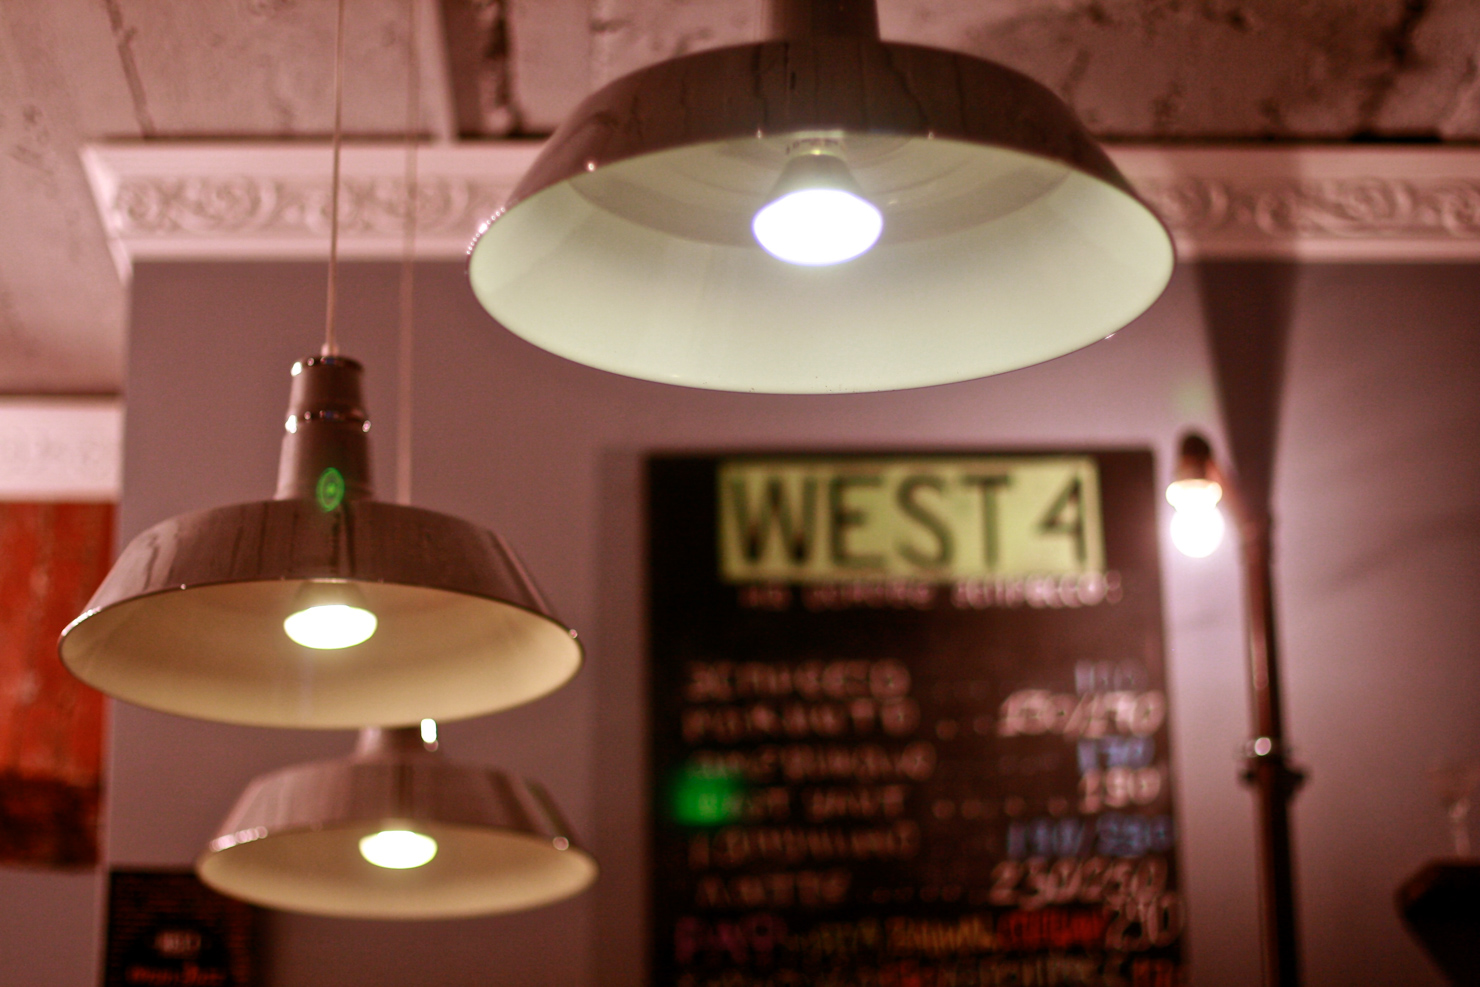 west 4 coffee bar moscow russia sprudge